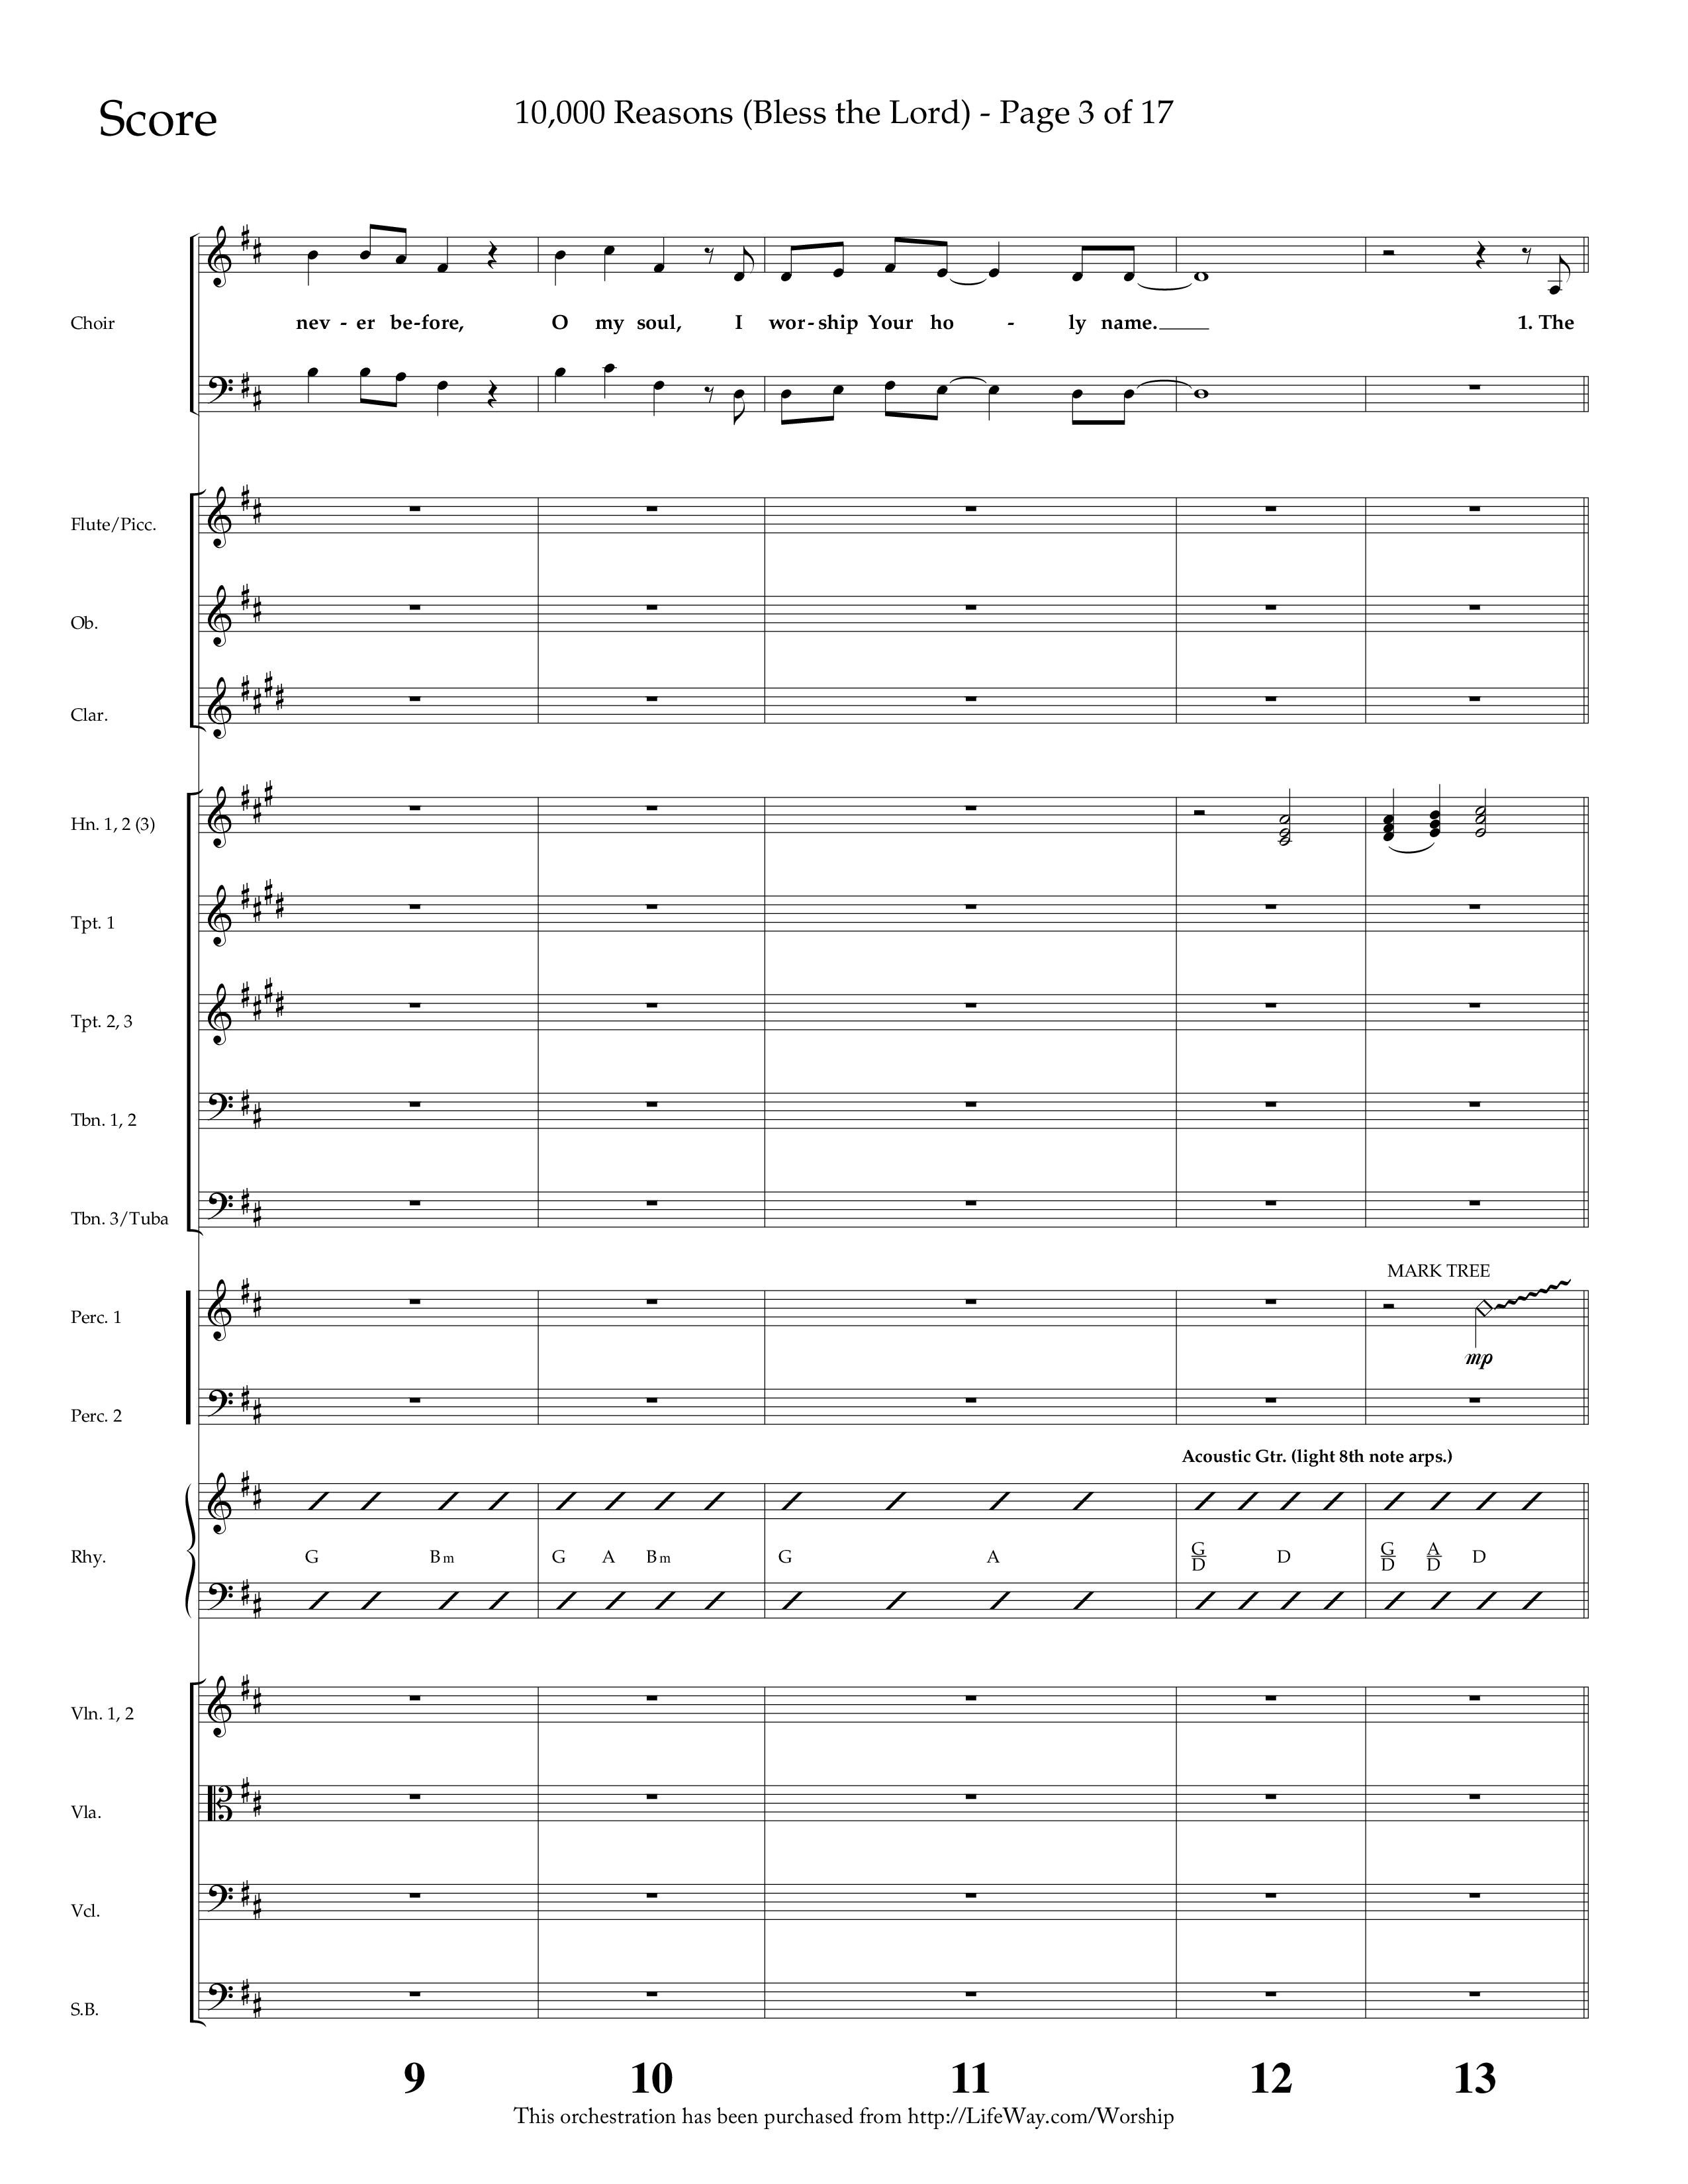 10,000 Reasons (Bless The Lord) (Choral Anthem SATB) Orchestration (Lifeway Choral / Arr. Dave Williamson)